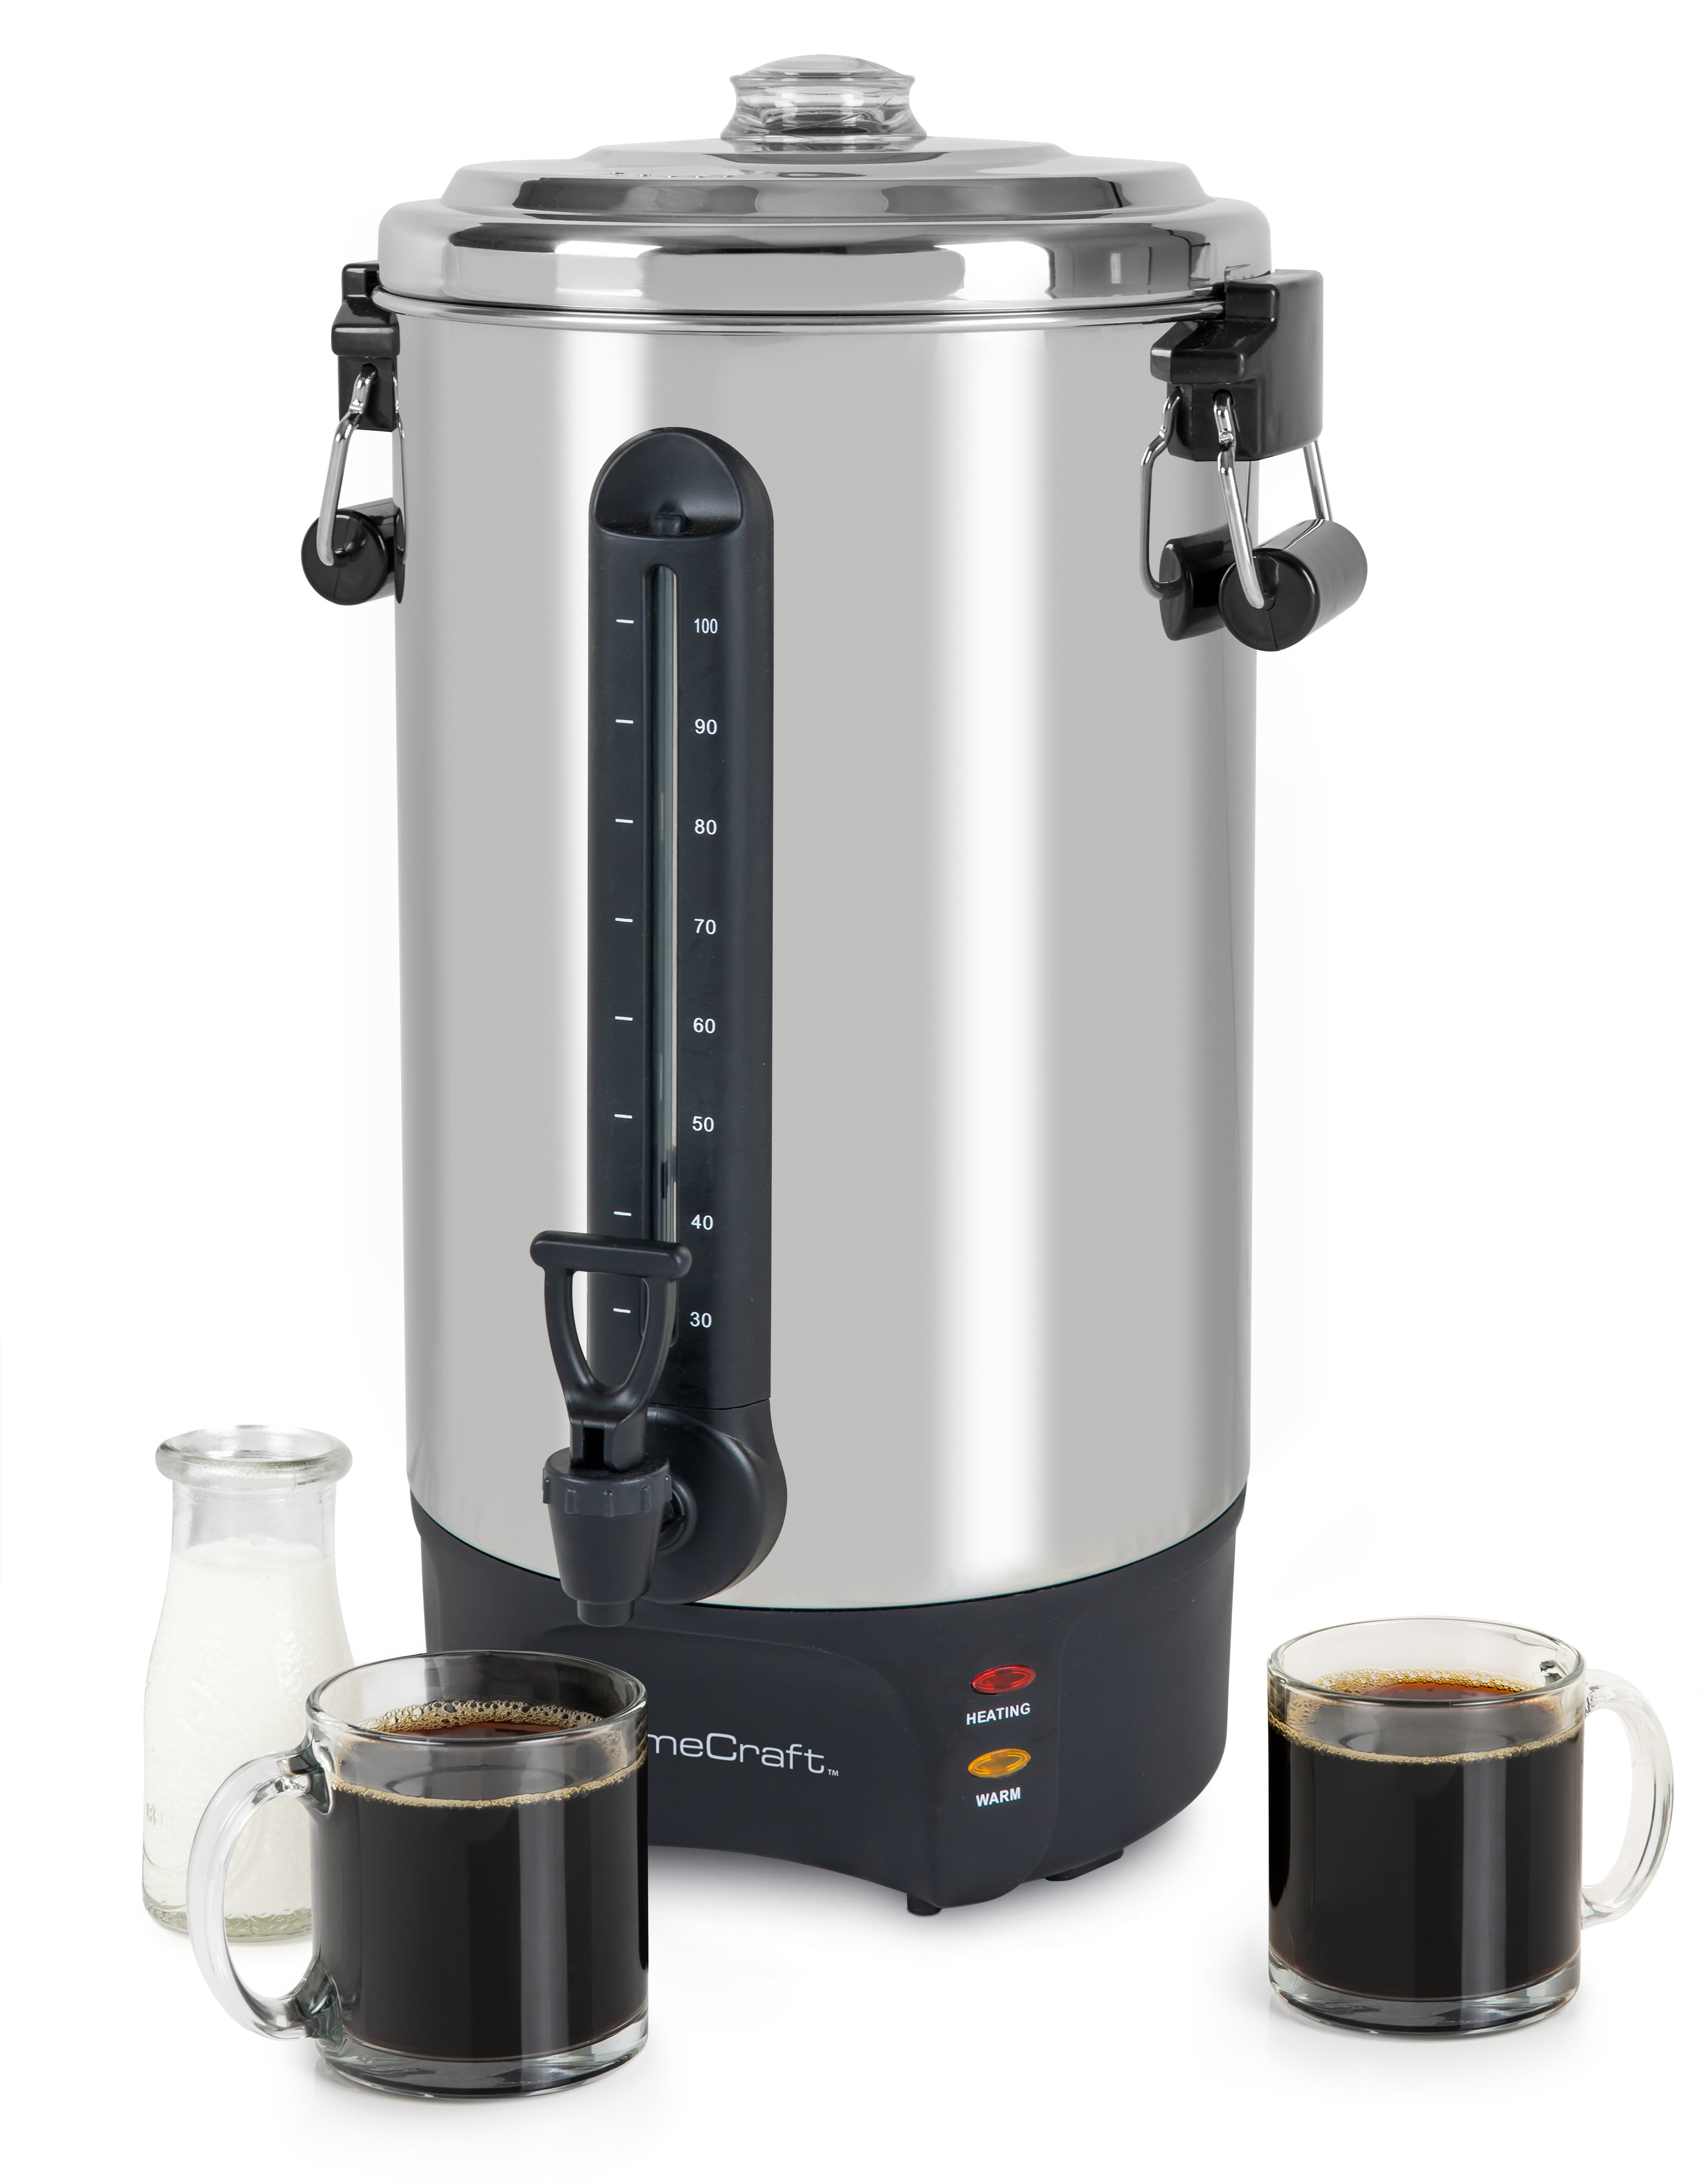 Auto Temperature Control Commercial & Home Urns Great for Catering Buffets Parties Weddings Holiday Jewish Dinners Shabbat Automatic Coffee Urn 30 Cups Stainless Steel Hot Water Boiler & Warmer